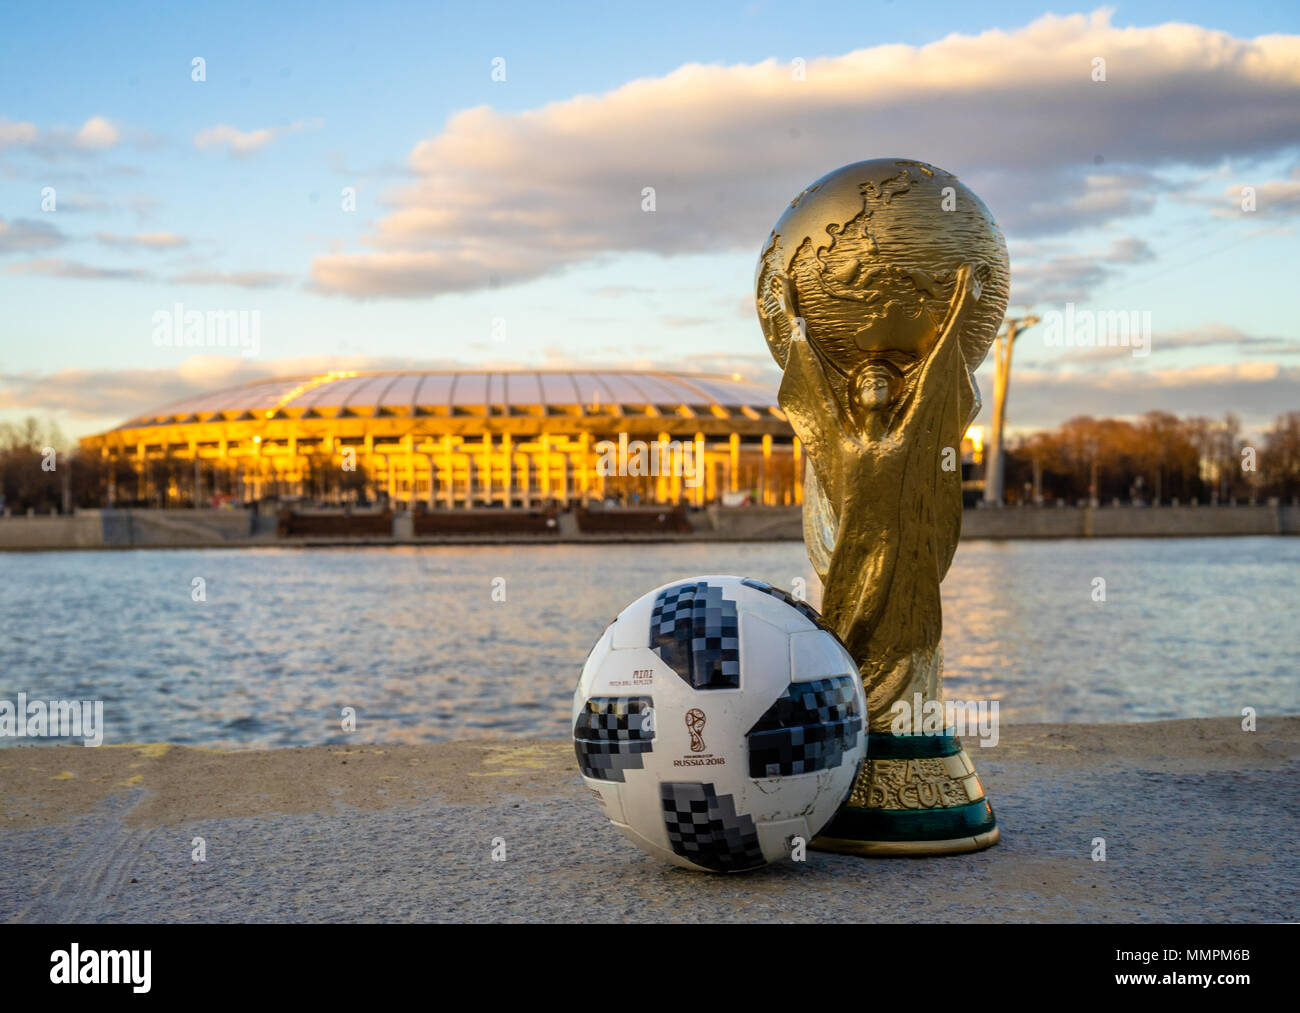 April 13, 2018 Moscow, Russia Trophy of the FIFA World Cup and official  ball of FIFA World Cup 2018 Adidas Telstar 18 against the backdrop of the  Luz Stock Photo - Alamy